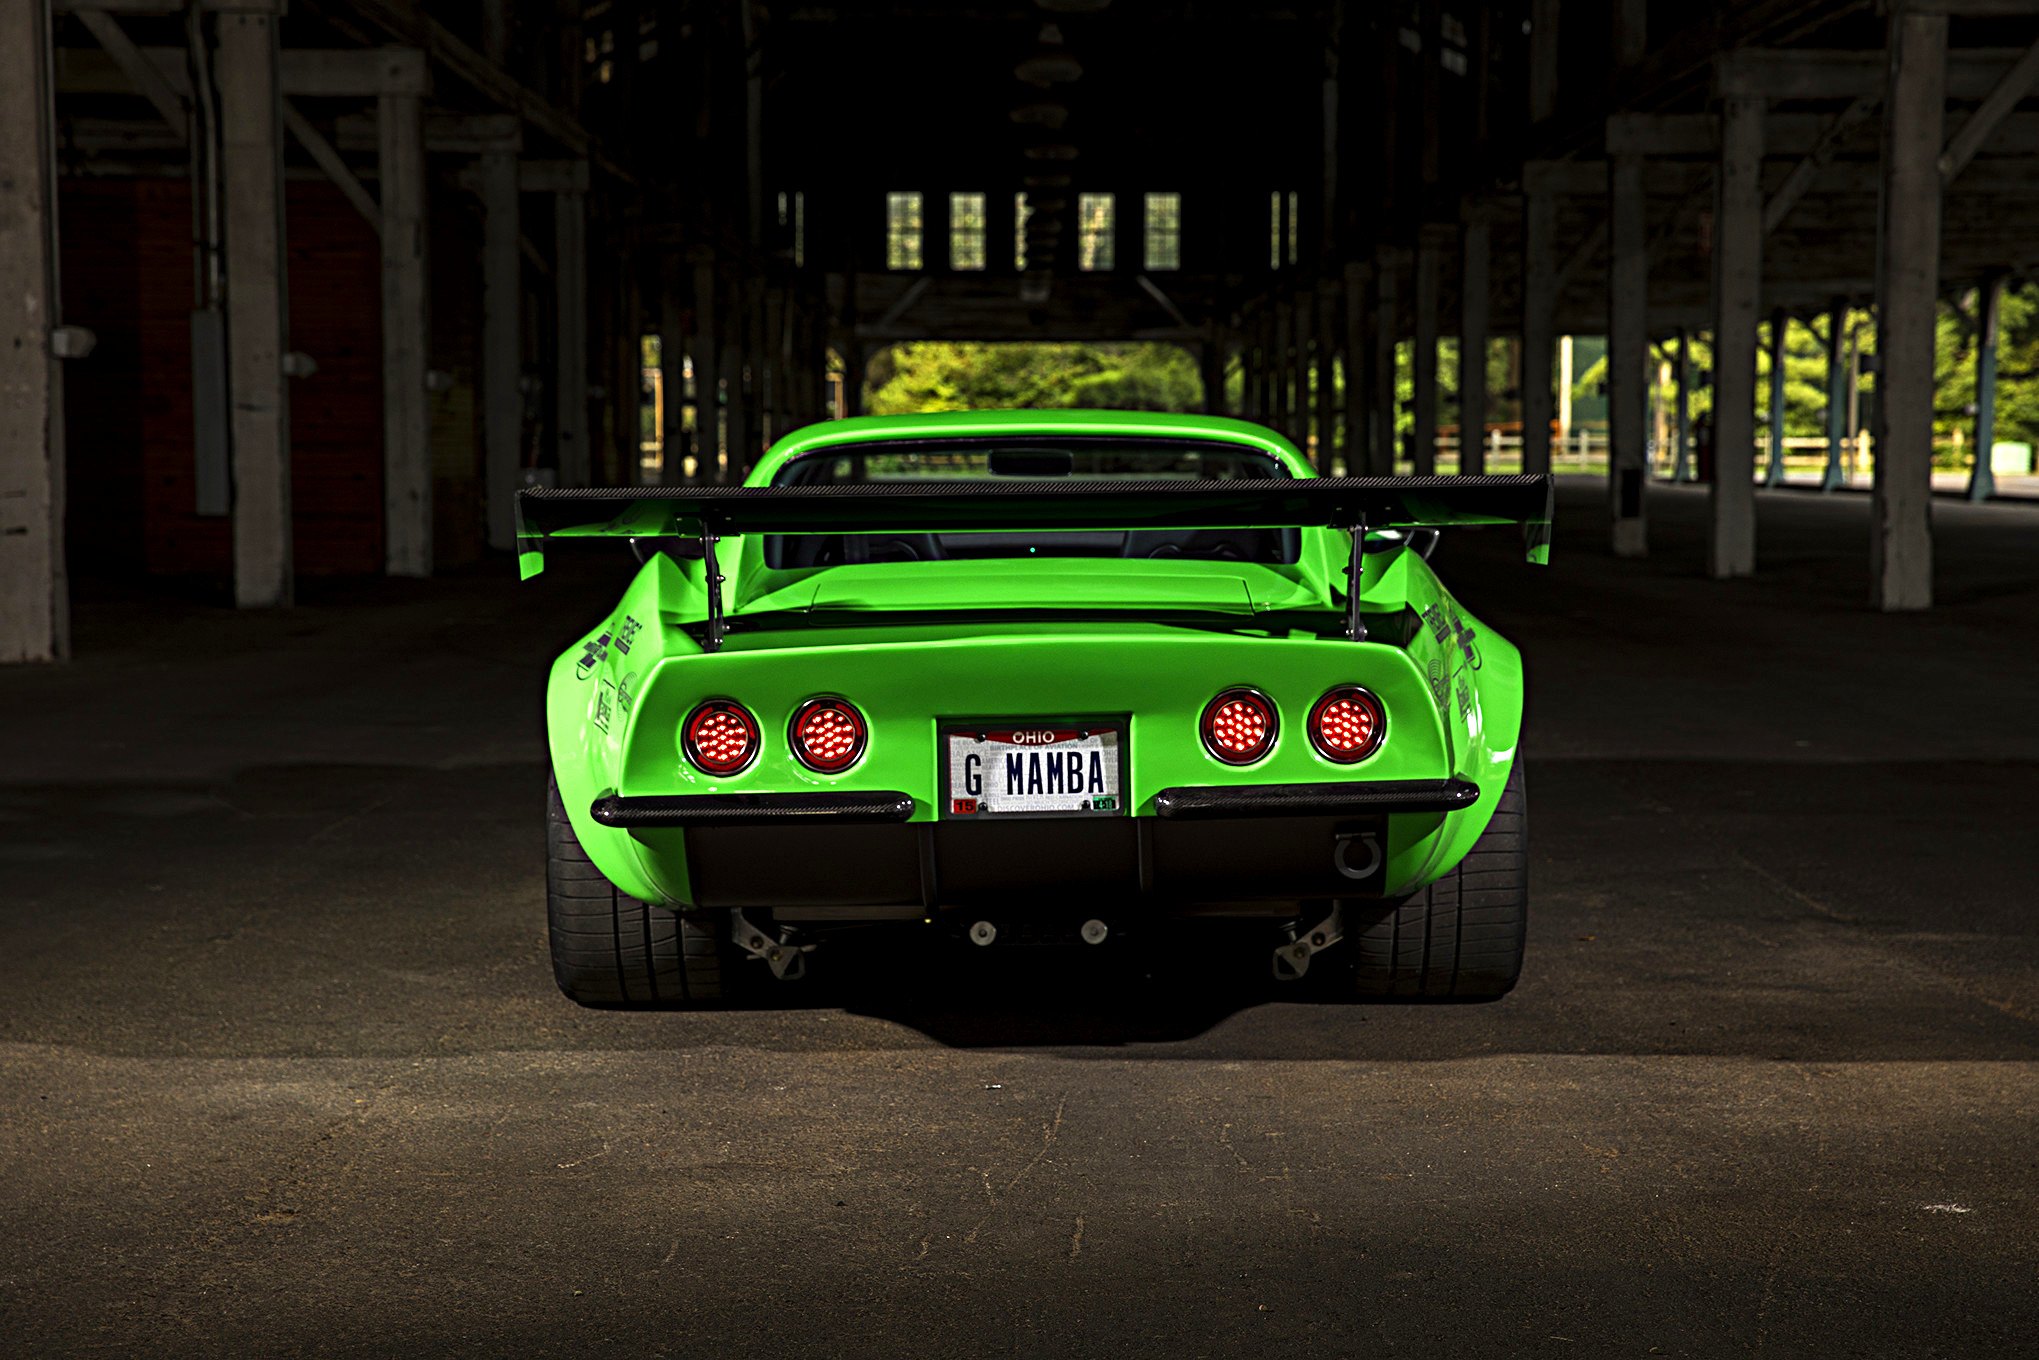 Carbon Fiber Rear Canards on Green Debadged Chevy Corvette - Photo by Robert McGaffin